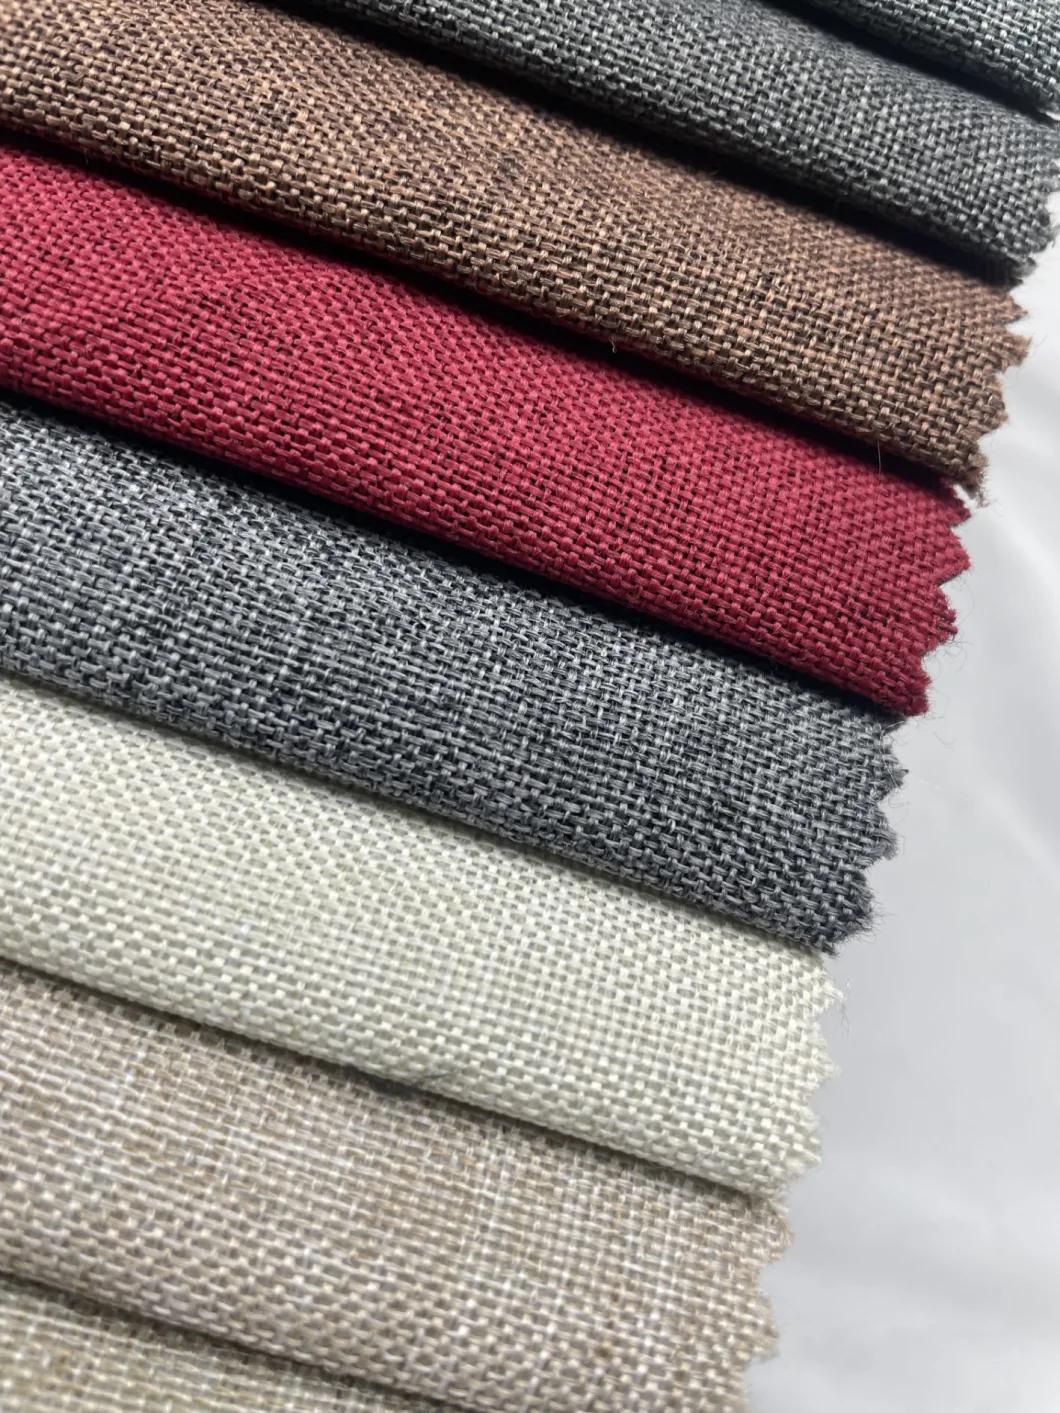 Woven Sofa Fabric Wholesale Most Popular Fabric for Sofa/Chair Fabric, Upholstery Fabric for Home Textile